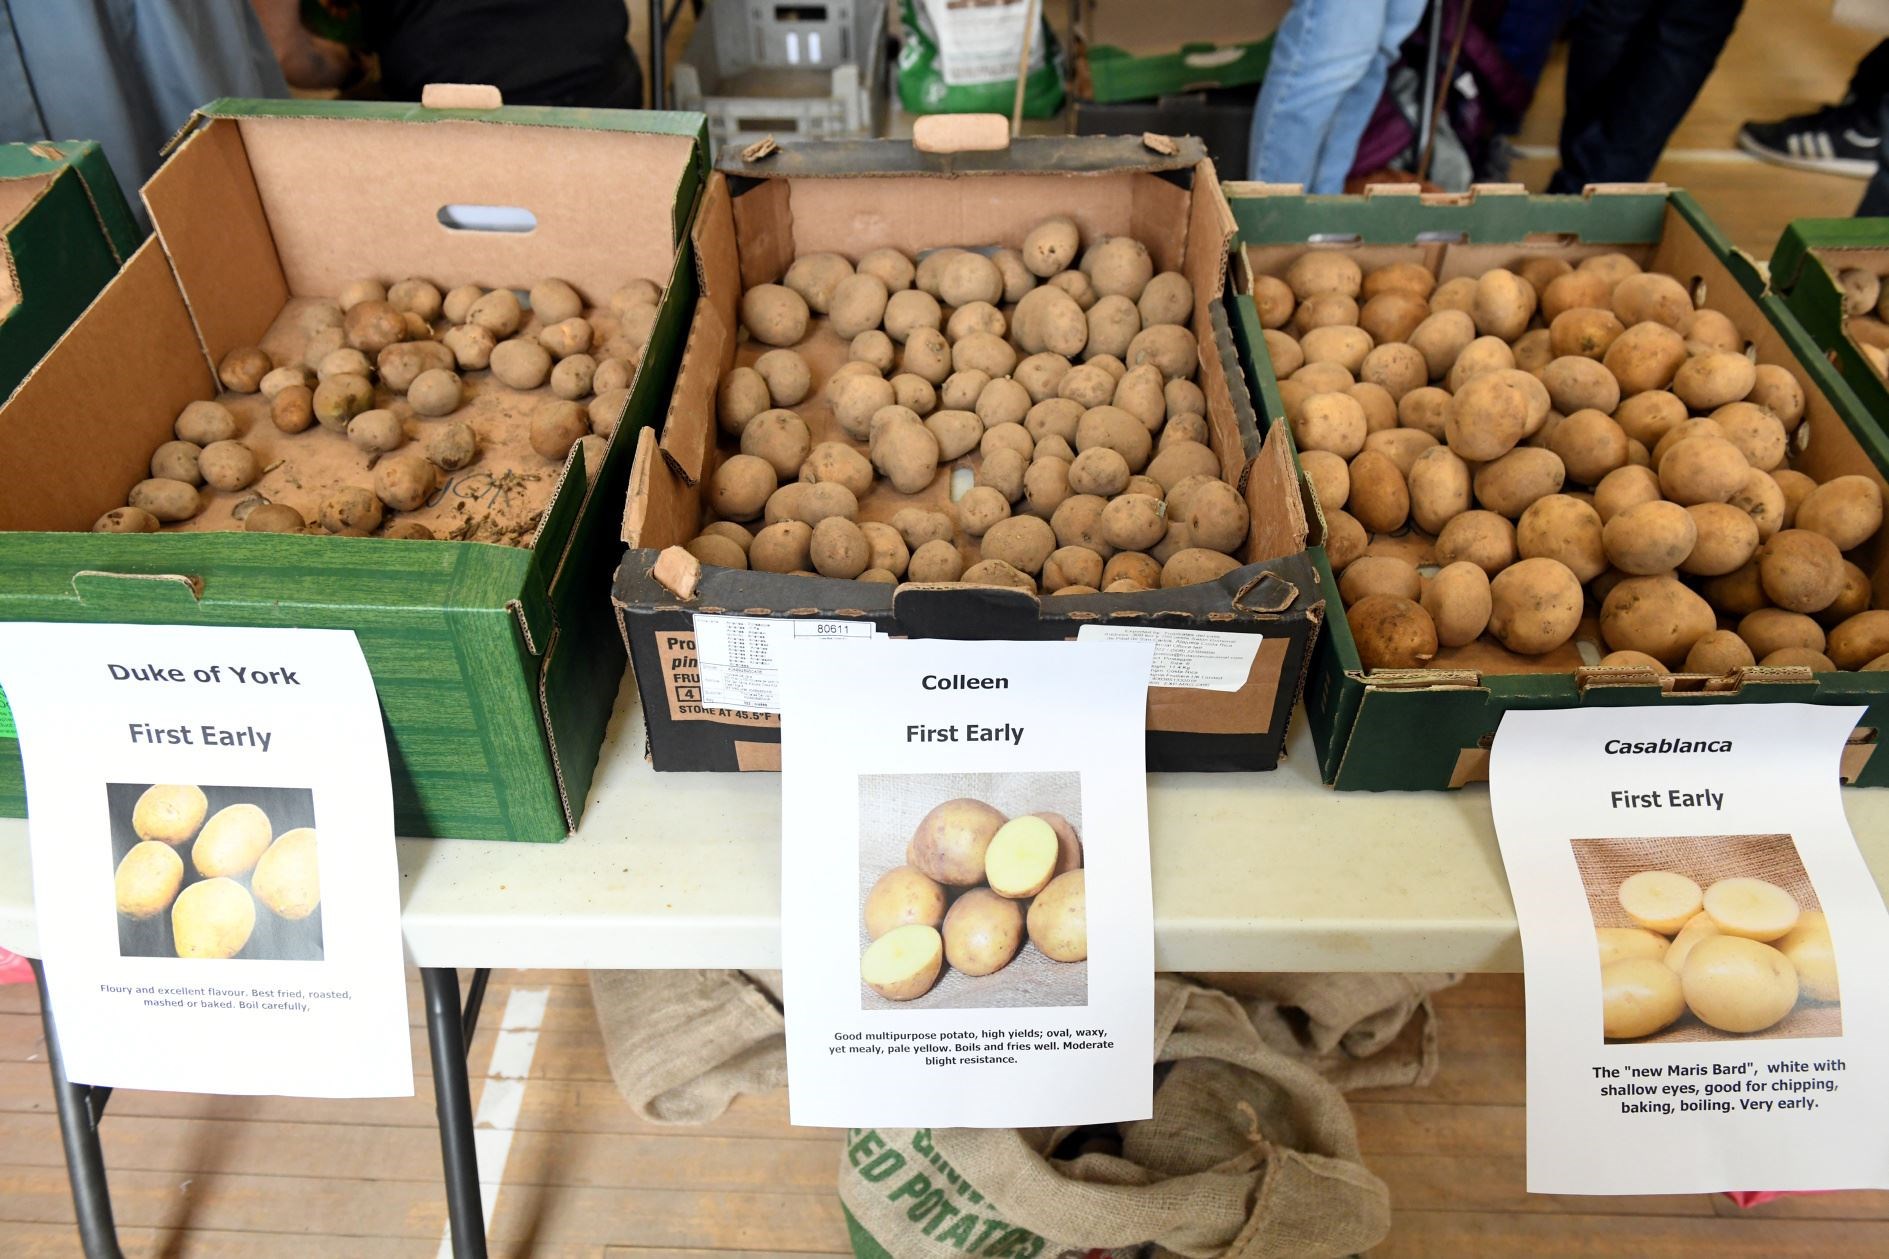 More than 40 varieties of seed potatoes will be available at the Black Isle Tattie Day.